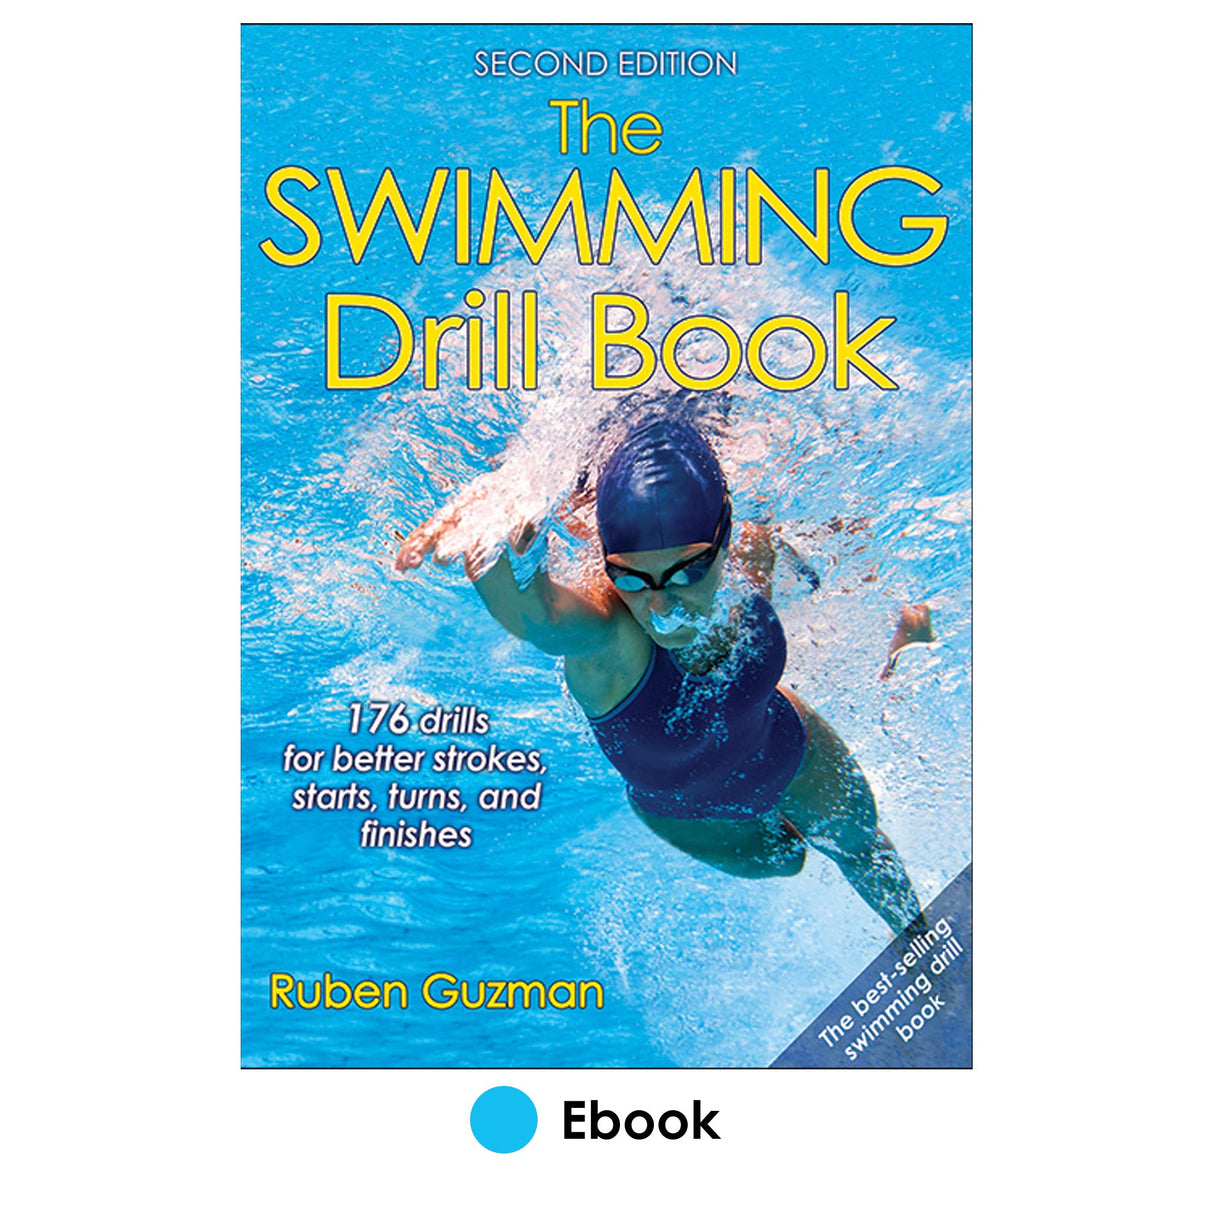 Swimming Drill Book 2nd Edition PDF, The